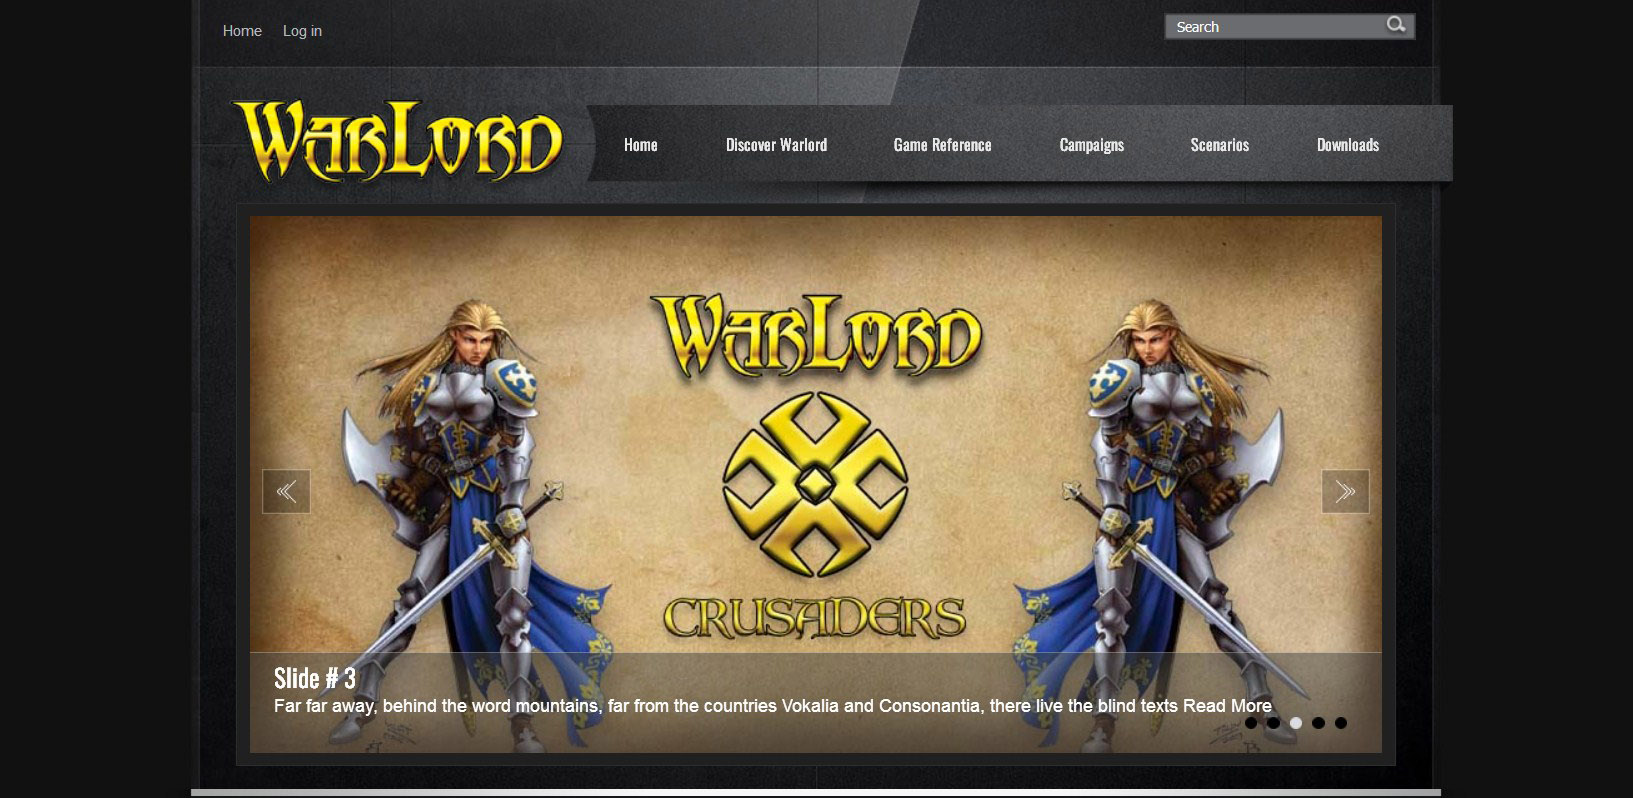 Warlord Army Creator 2.0.1 - Home Page - Above the fold